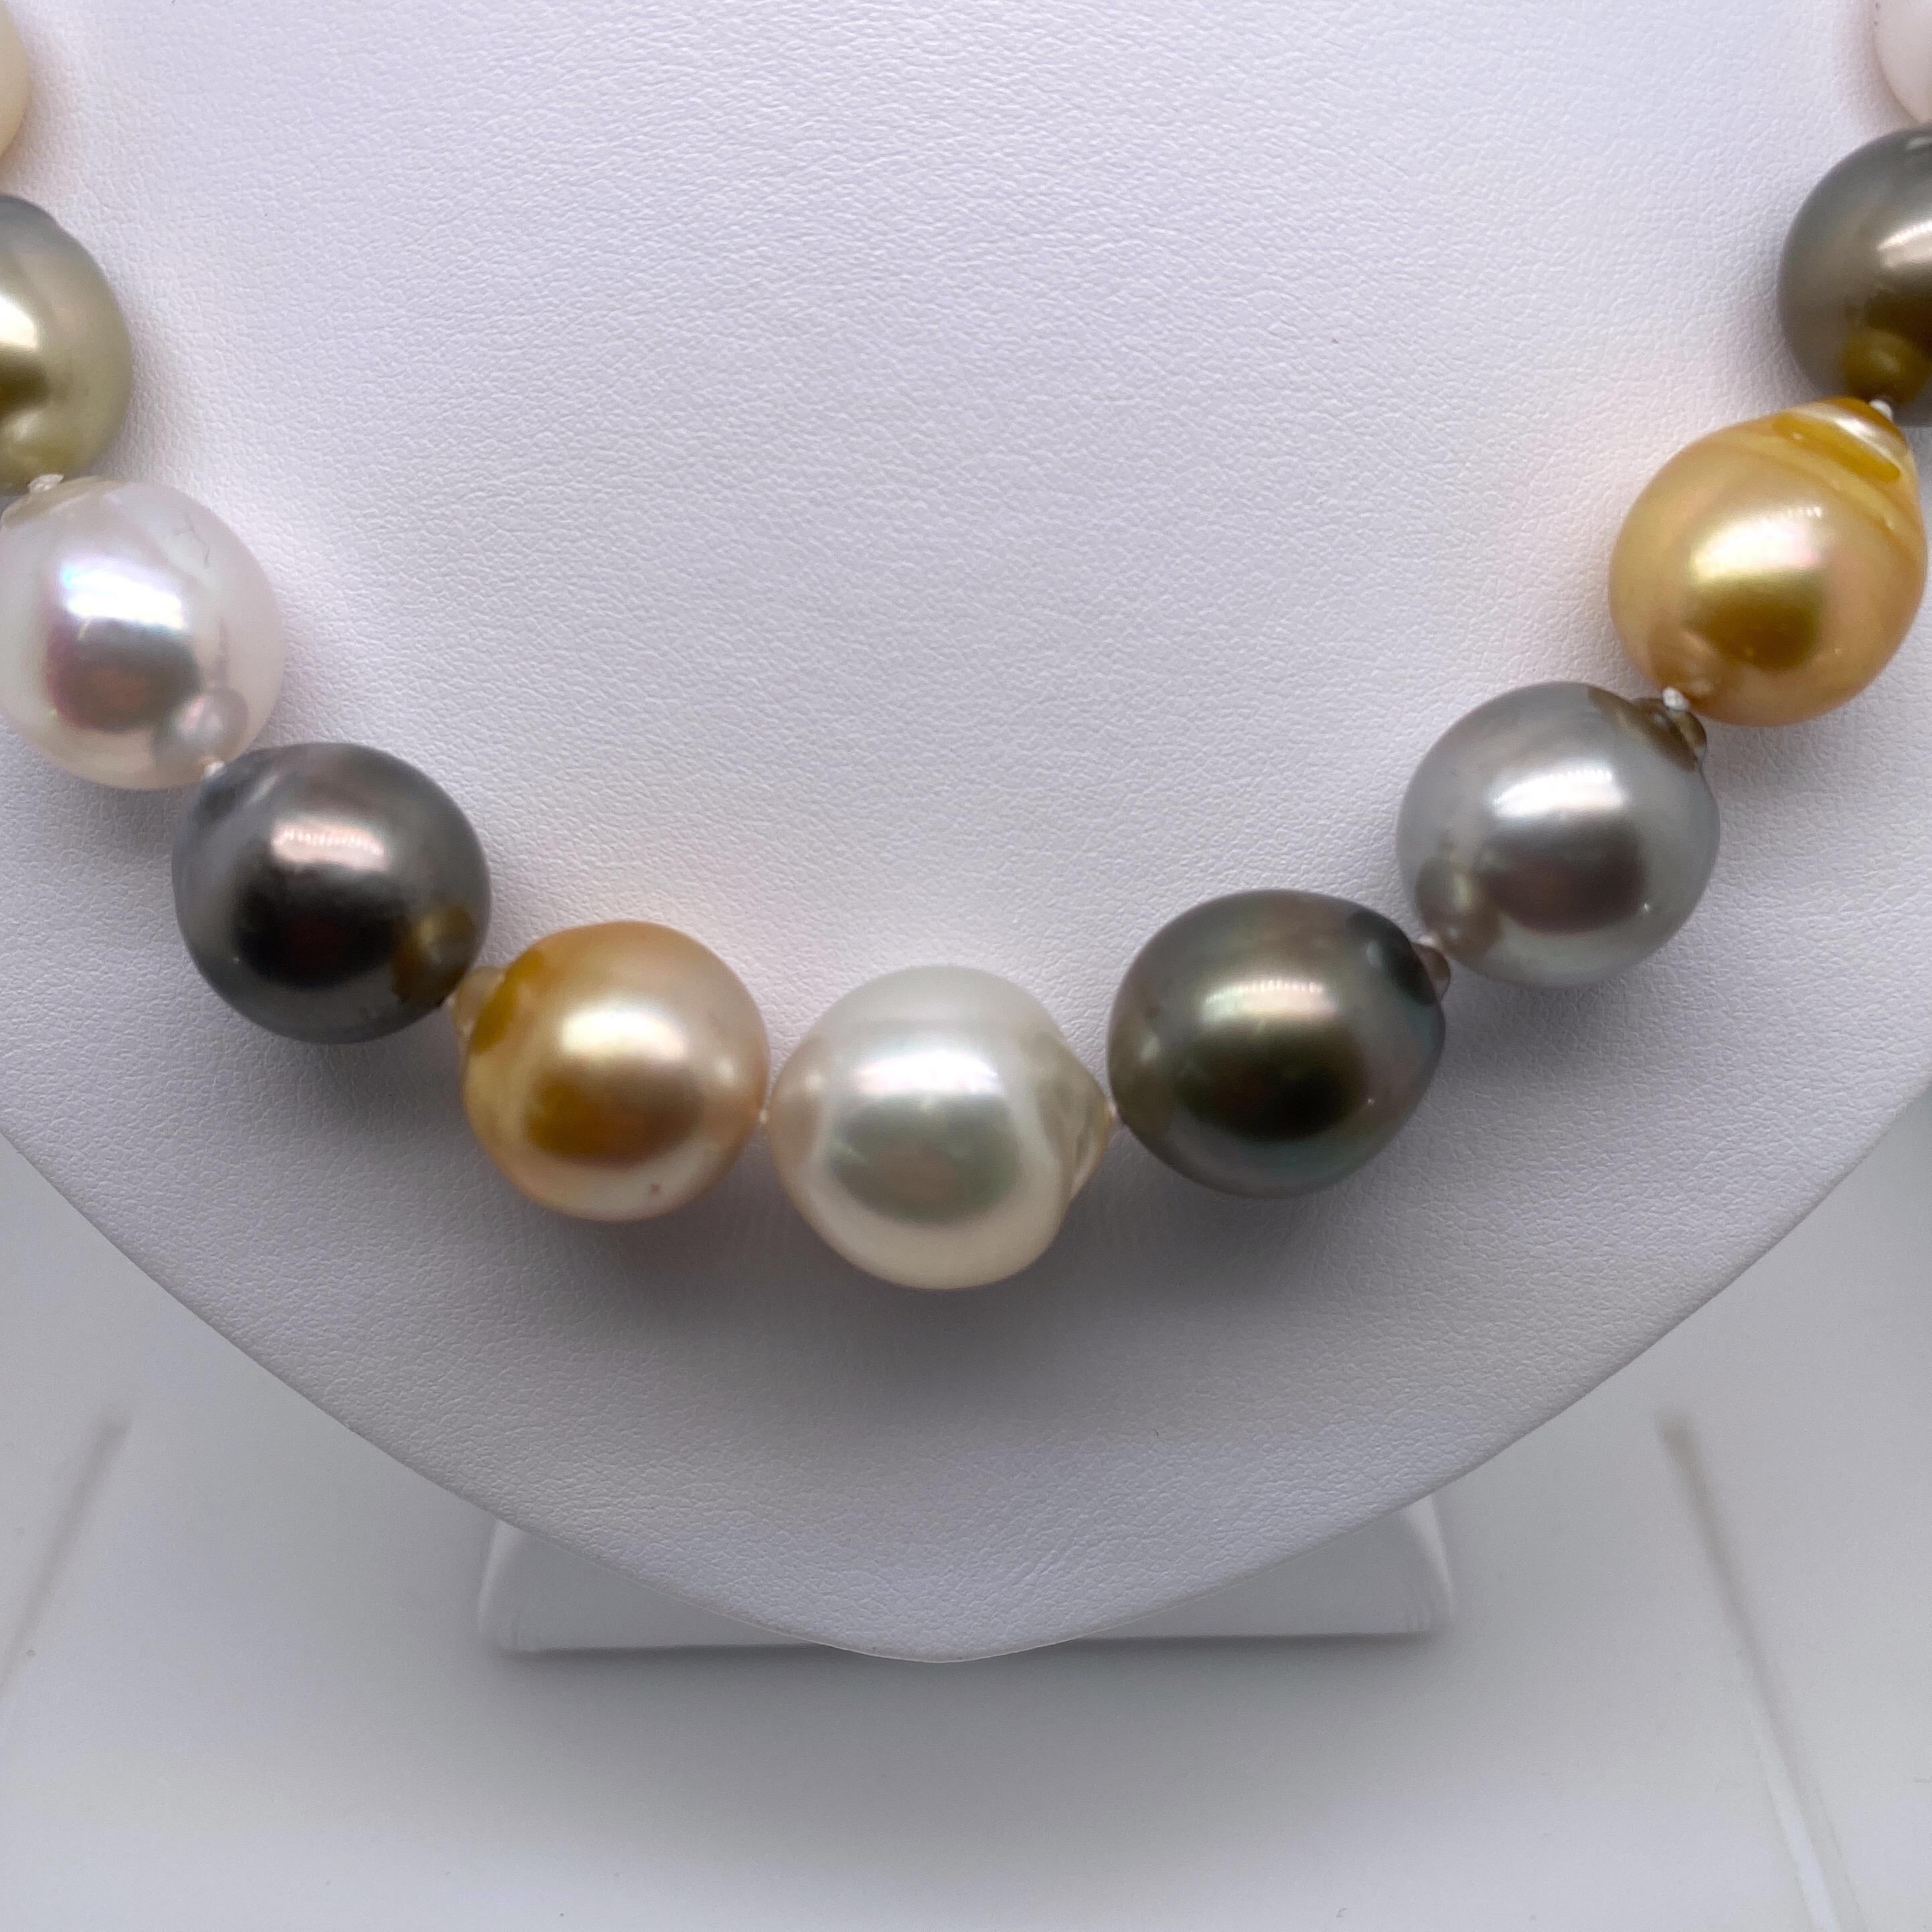 A lovely strand of 27 multi-color baroque pearls featuring White South Sea, Golden South Sea and Tahitian pearls measuring 12-16 mm with a yellow gold diamond clasp.
Quality: AAA
Pearl Luster: AAA Excellent
Nacre : Very Thick

Strand can be made to